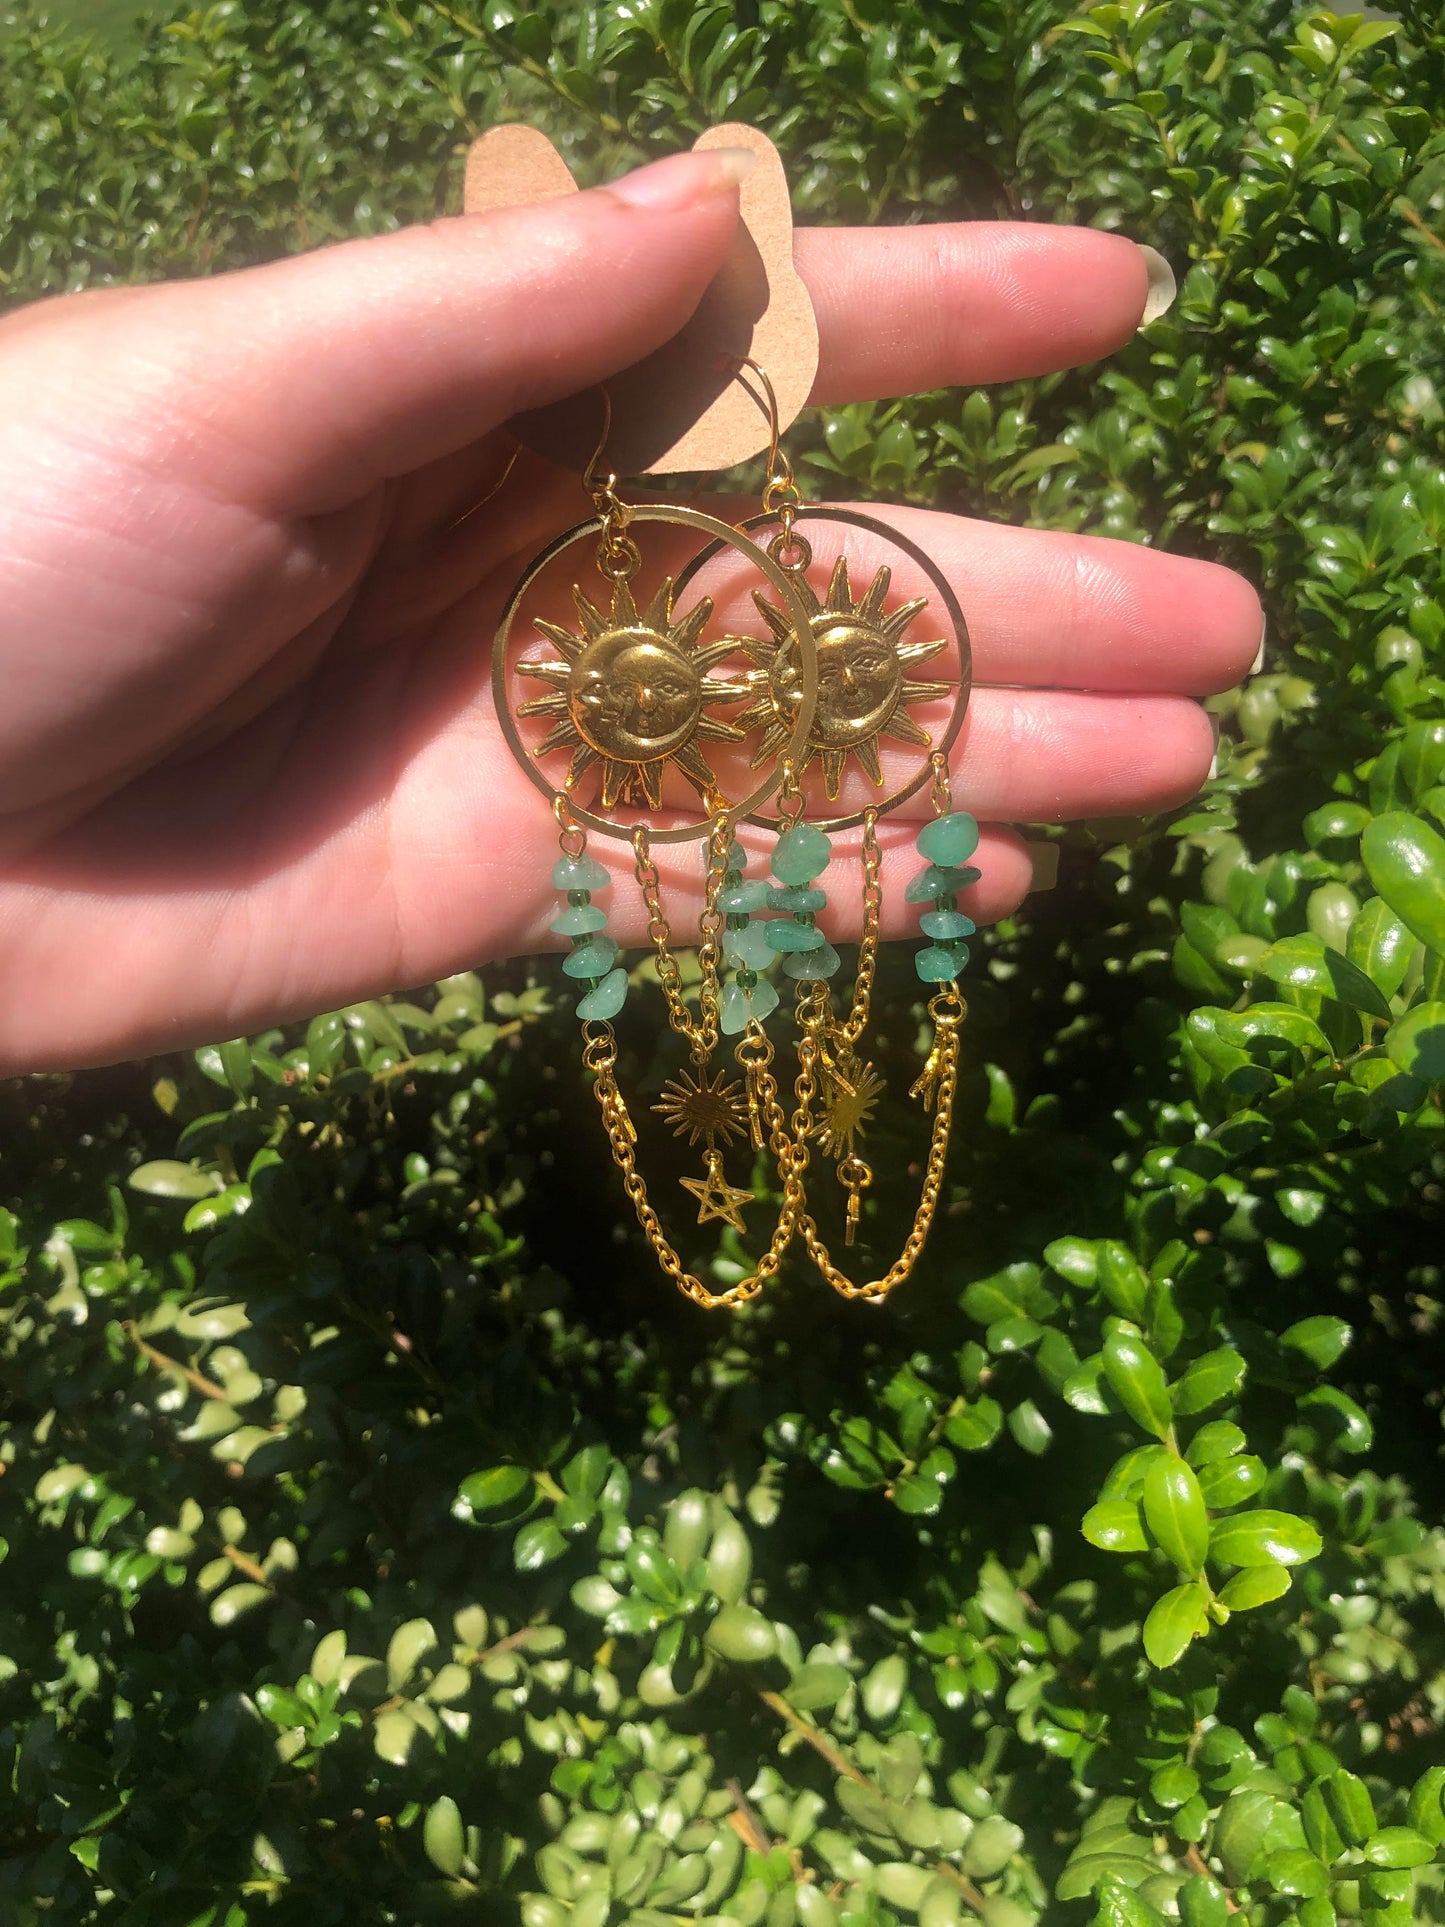 Gold Sun and Moon Earrings with Green Stones and Chains